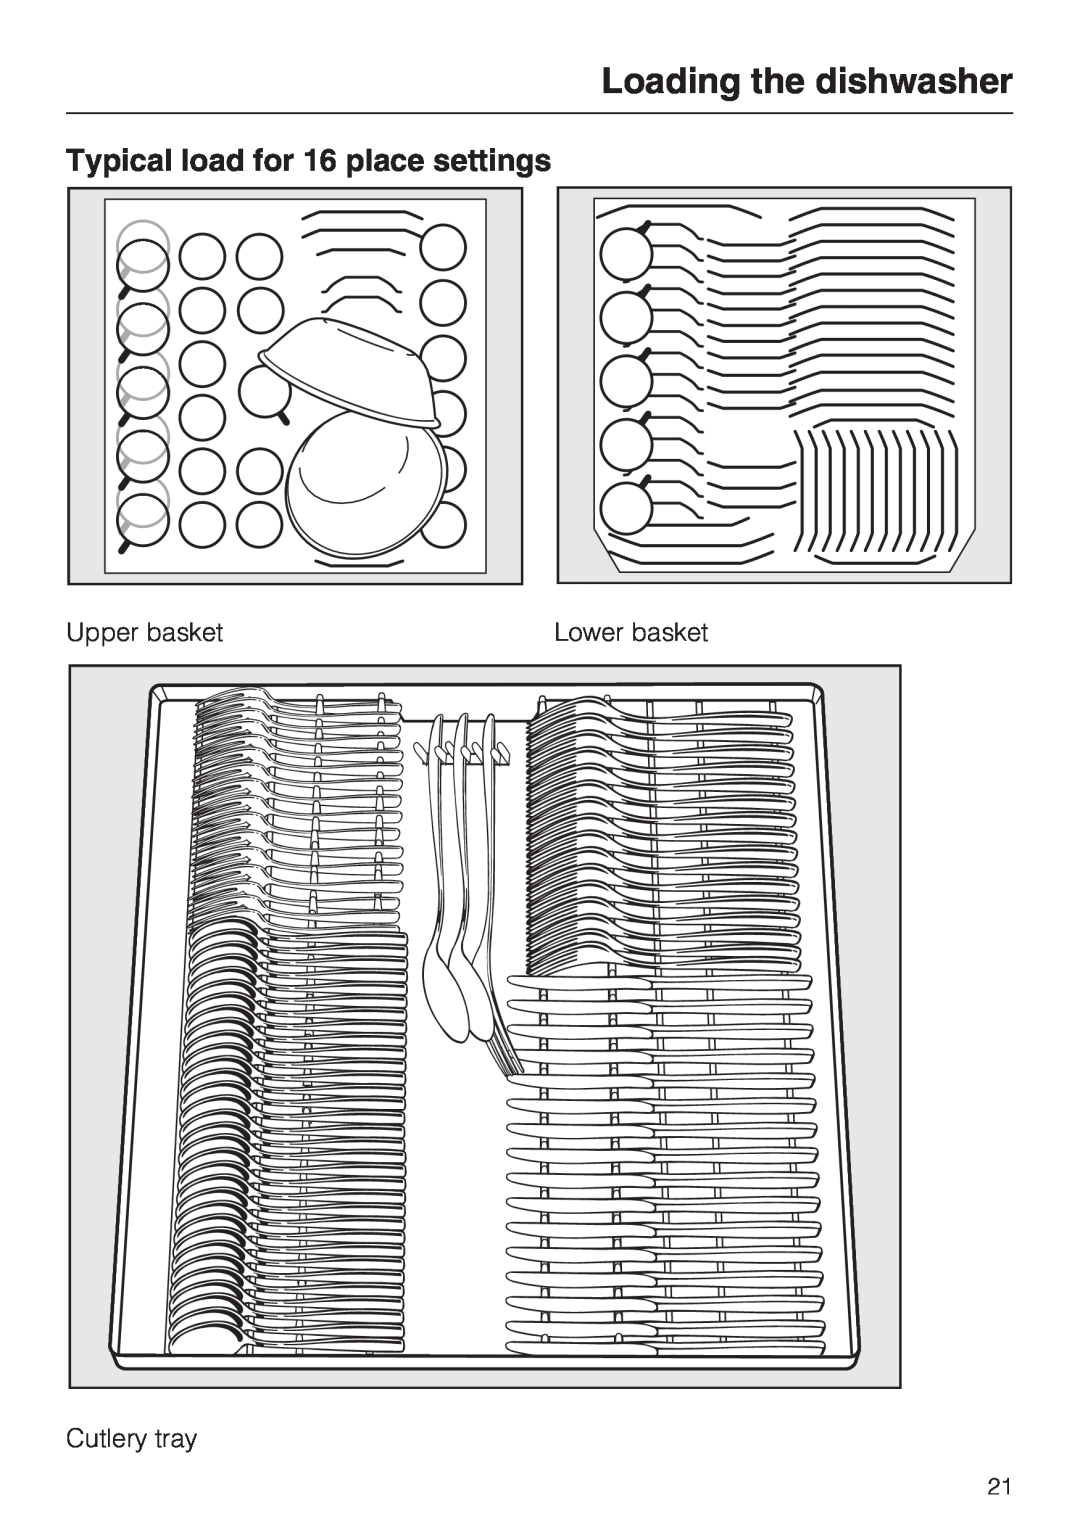 Miele G 5700, G 5705 operating instructions Typical load for 16 place settings, Loading the dishwasher 